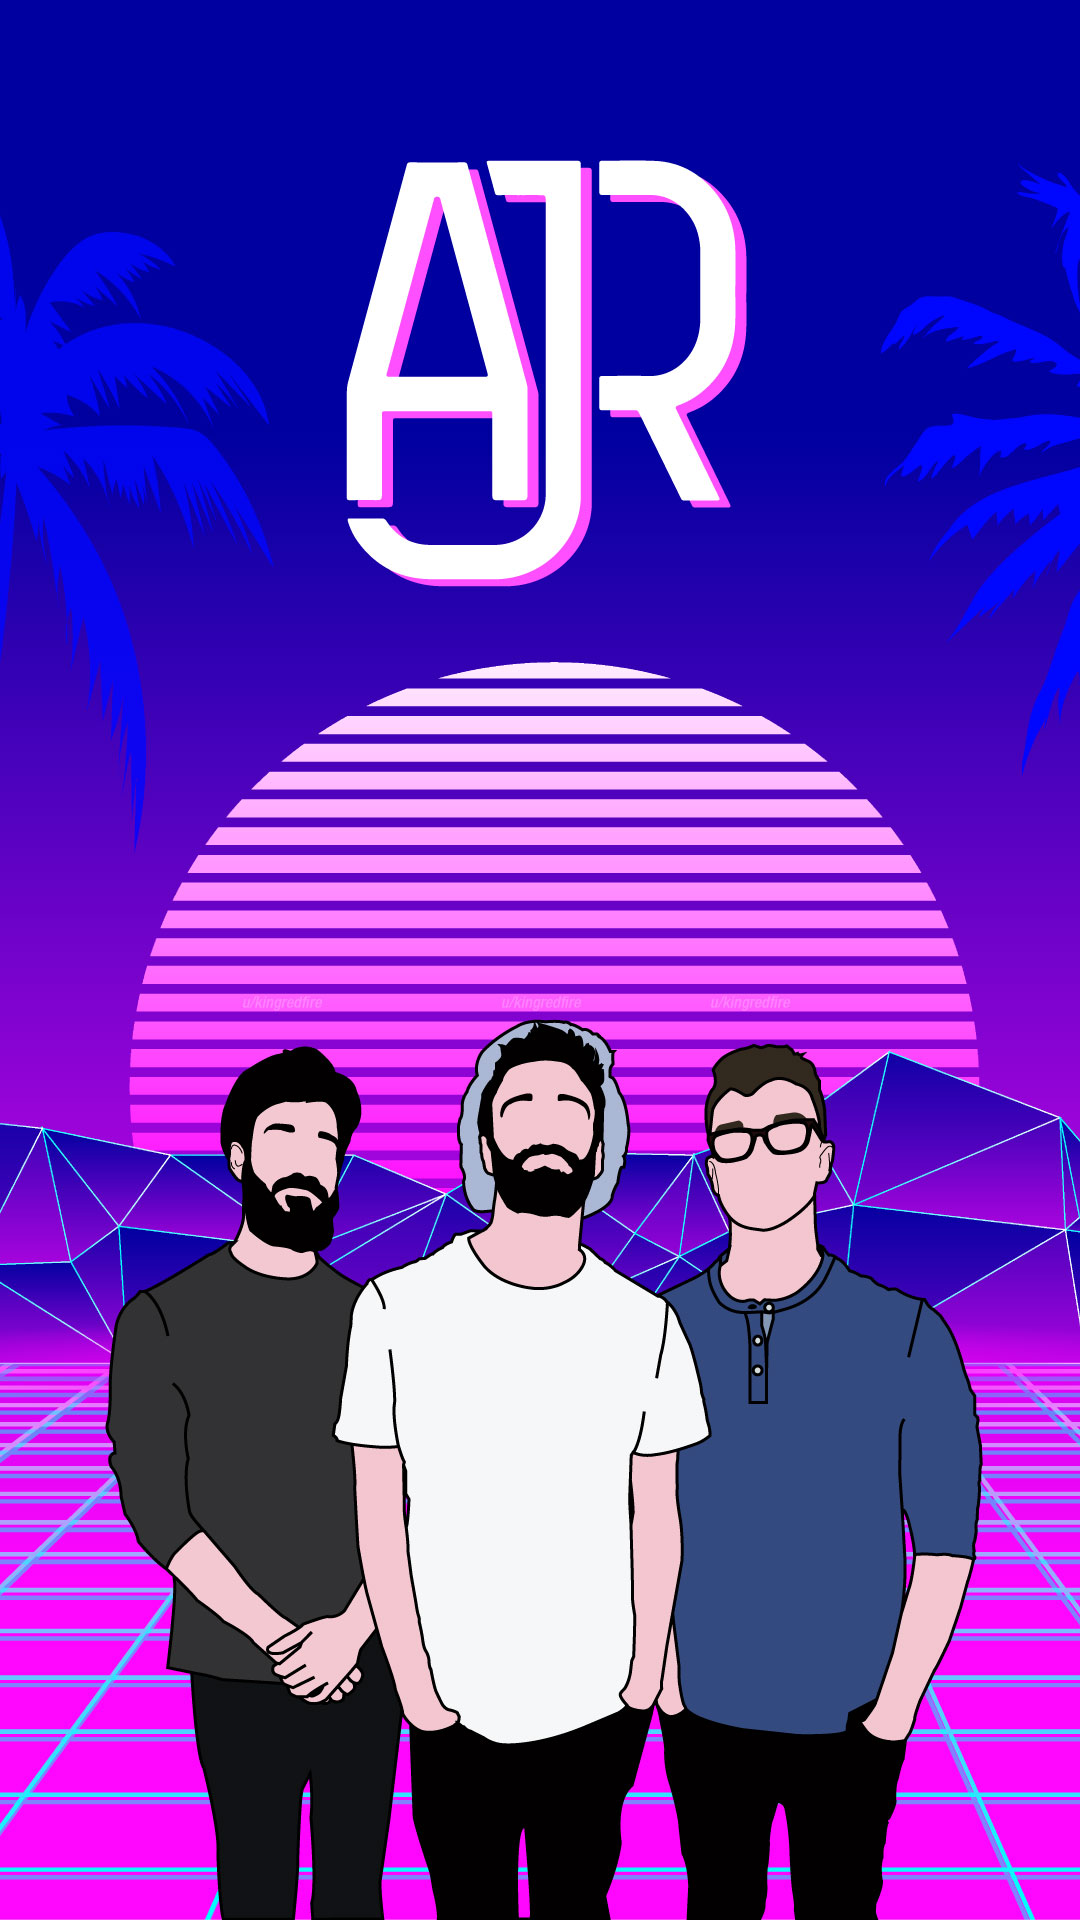 Upon request, here's the mobile wallpaper version of my art!: AJR